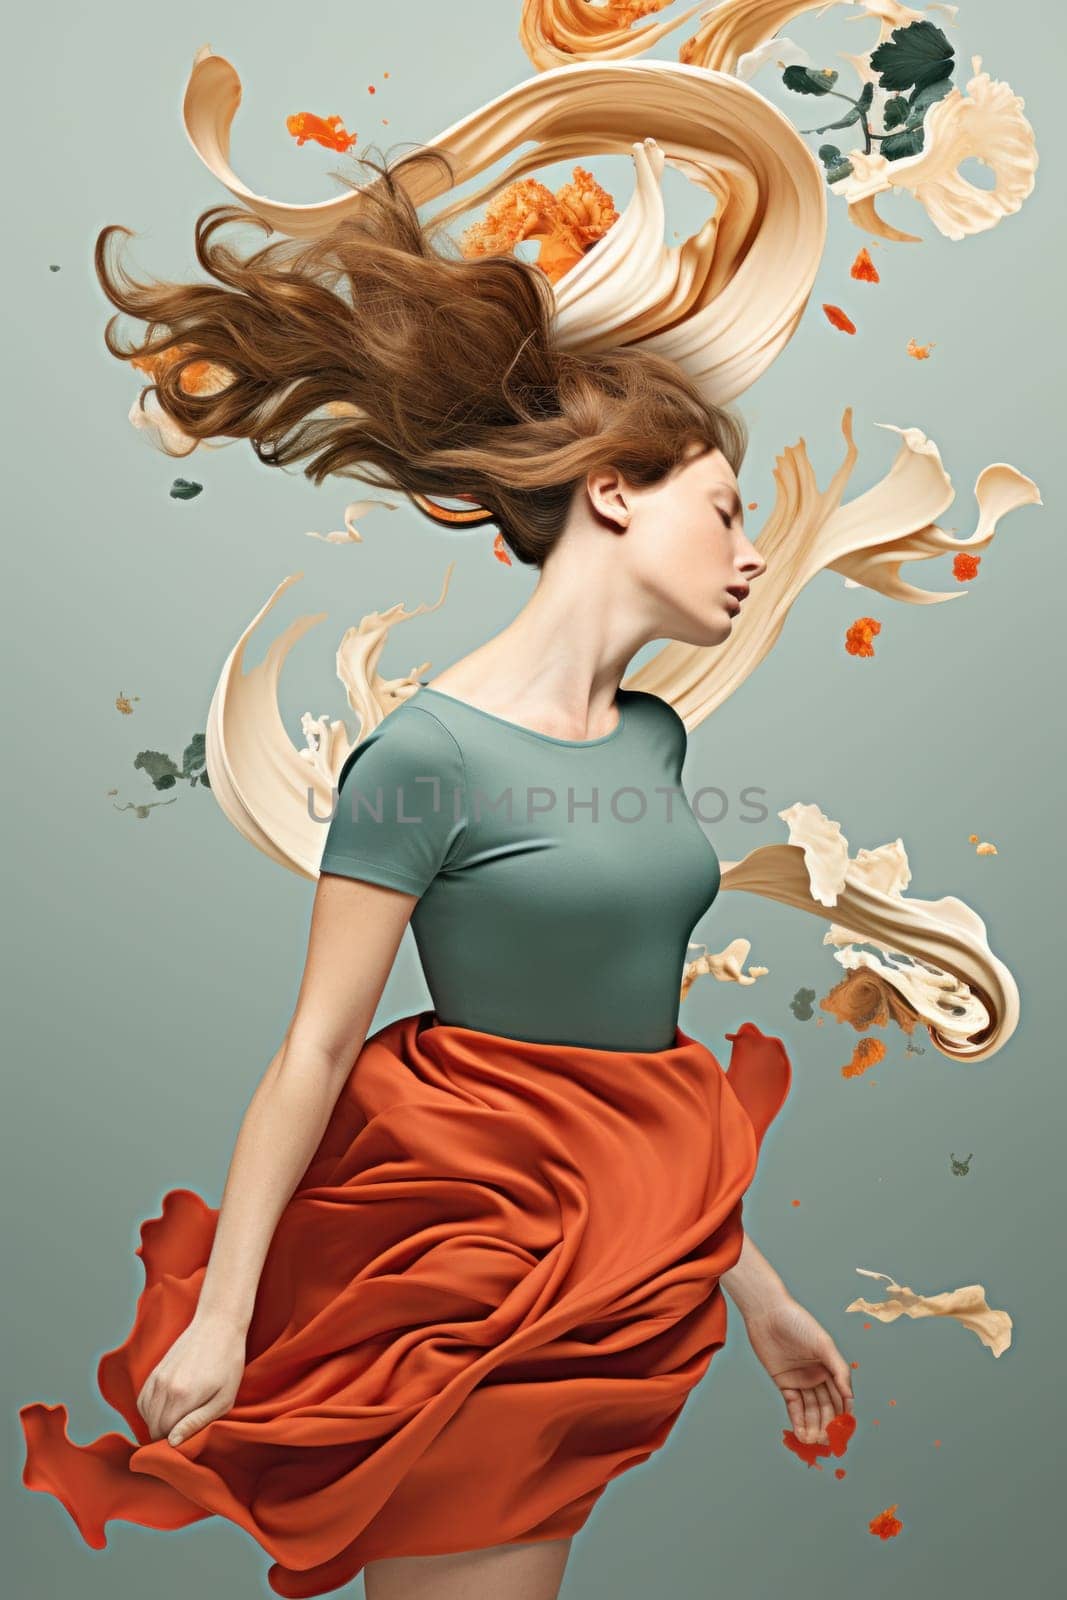 A woman with long hair flying through the air, AI by starush